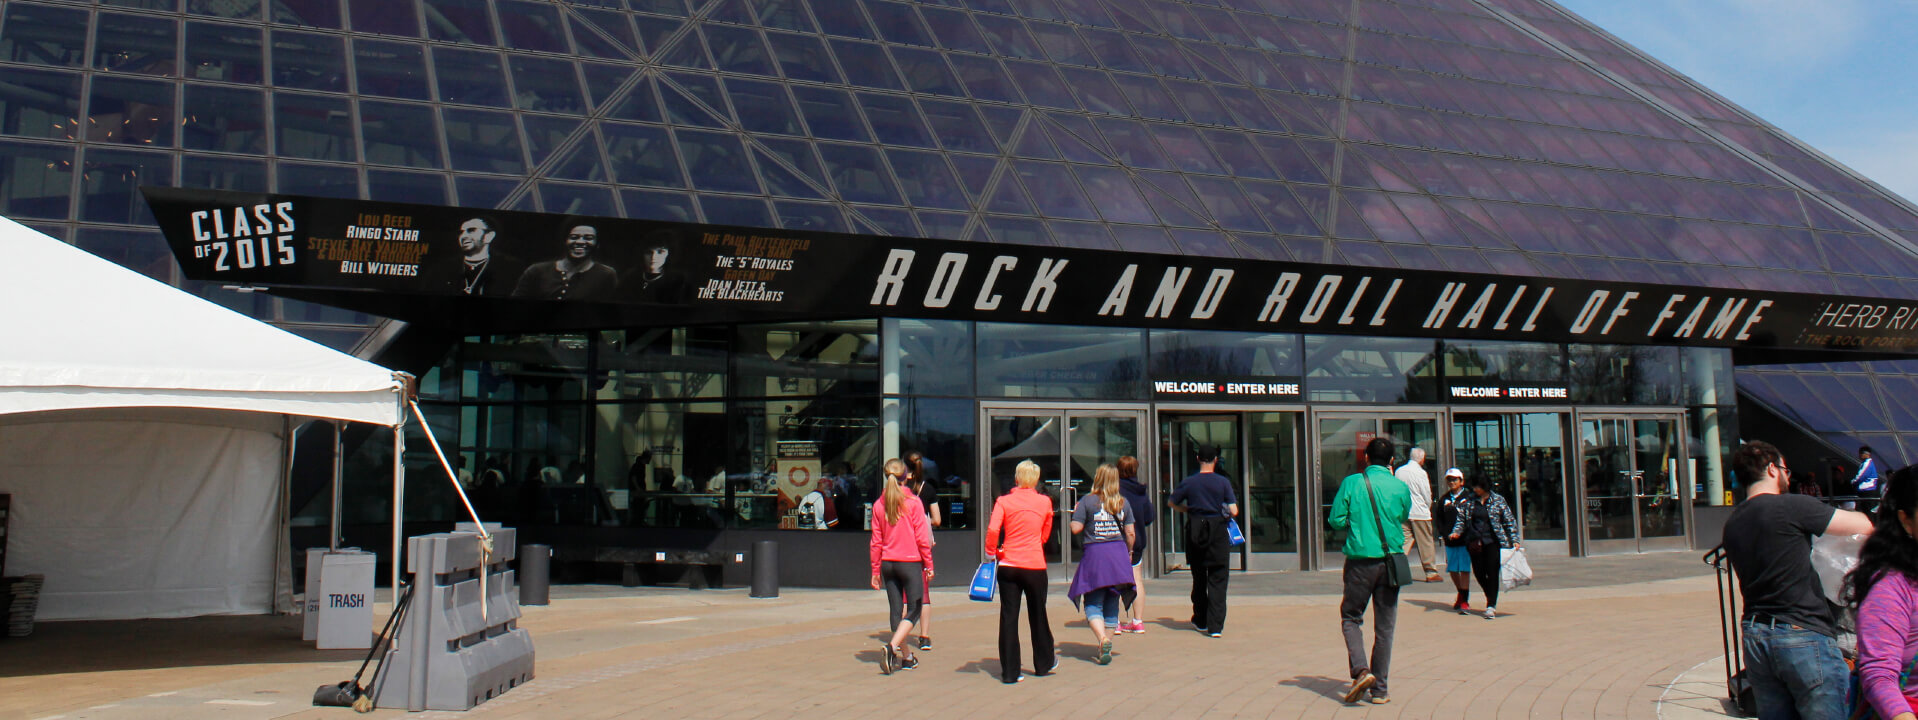 Rock & Roll Hall of Fame - Cleveland